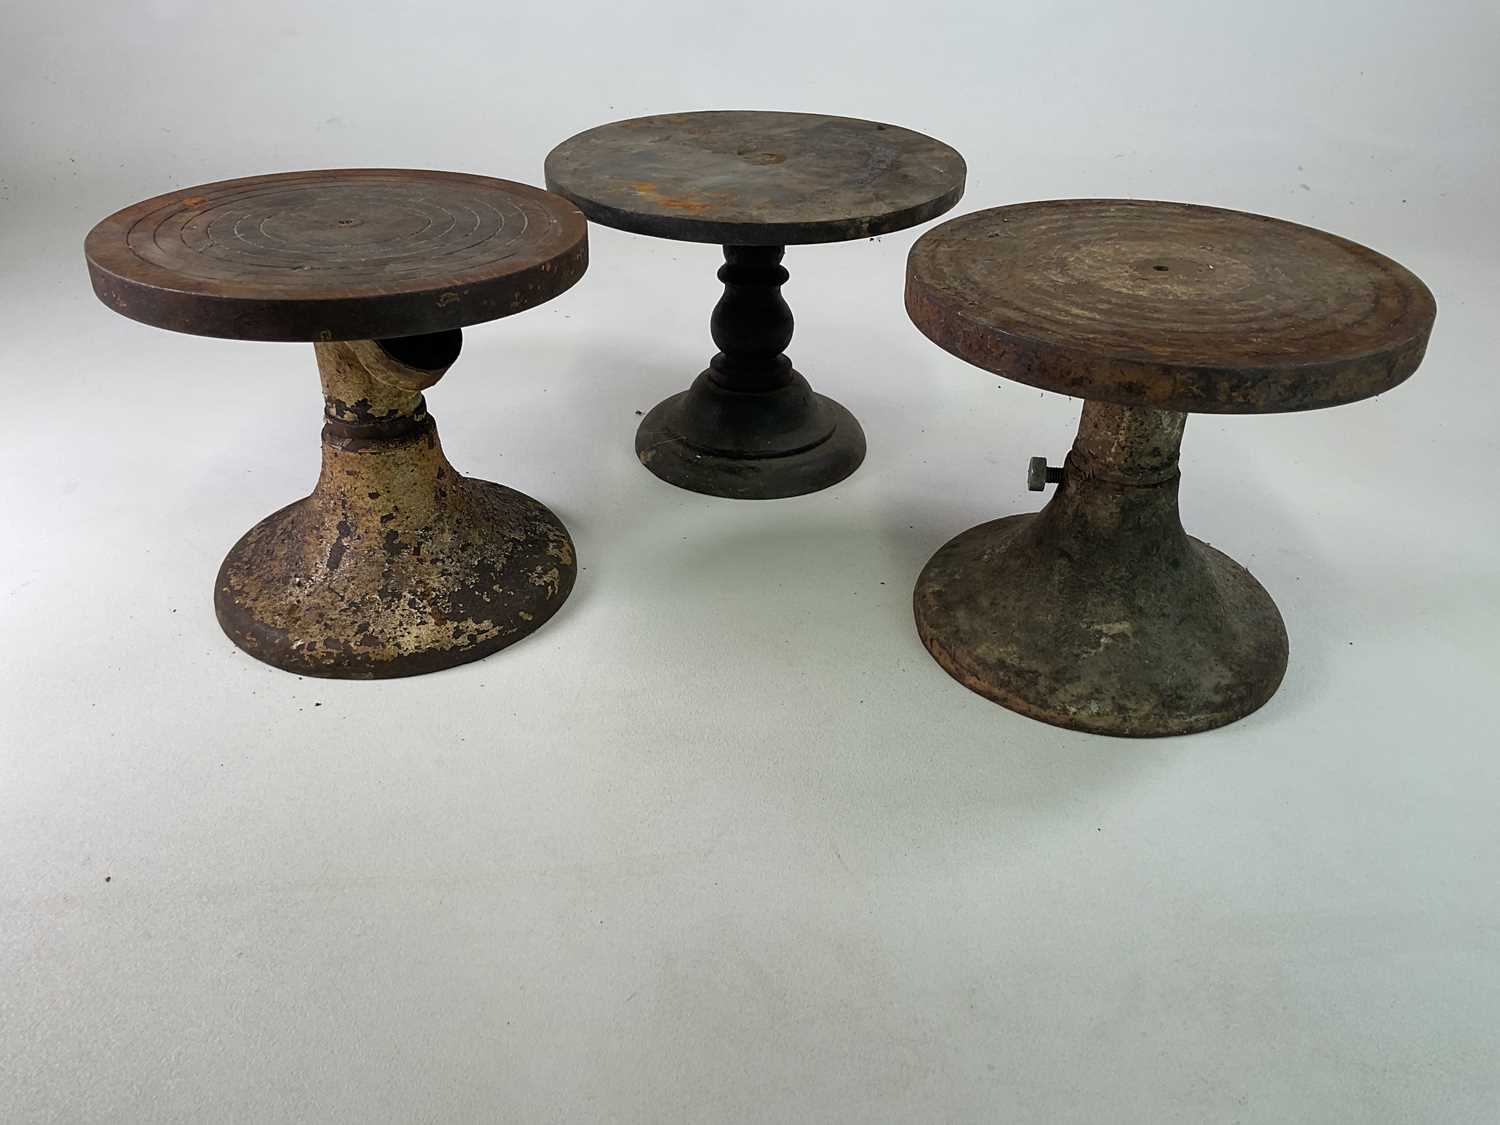 Three early 20th century cast iron potters painting wheels, reputedly from the Wedgwood factory